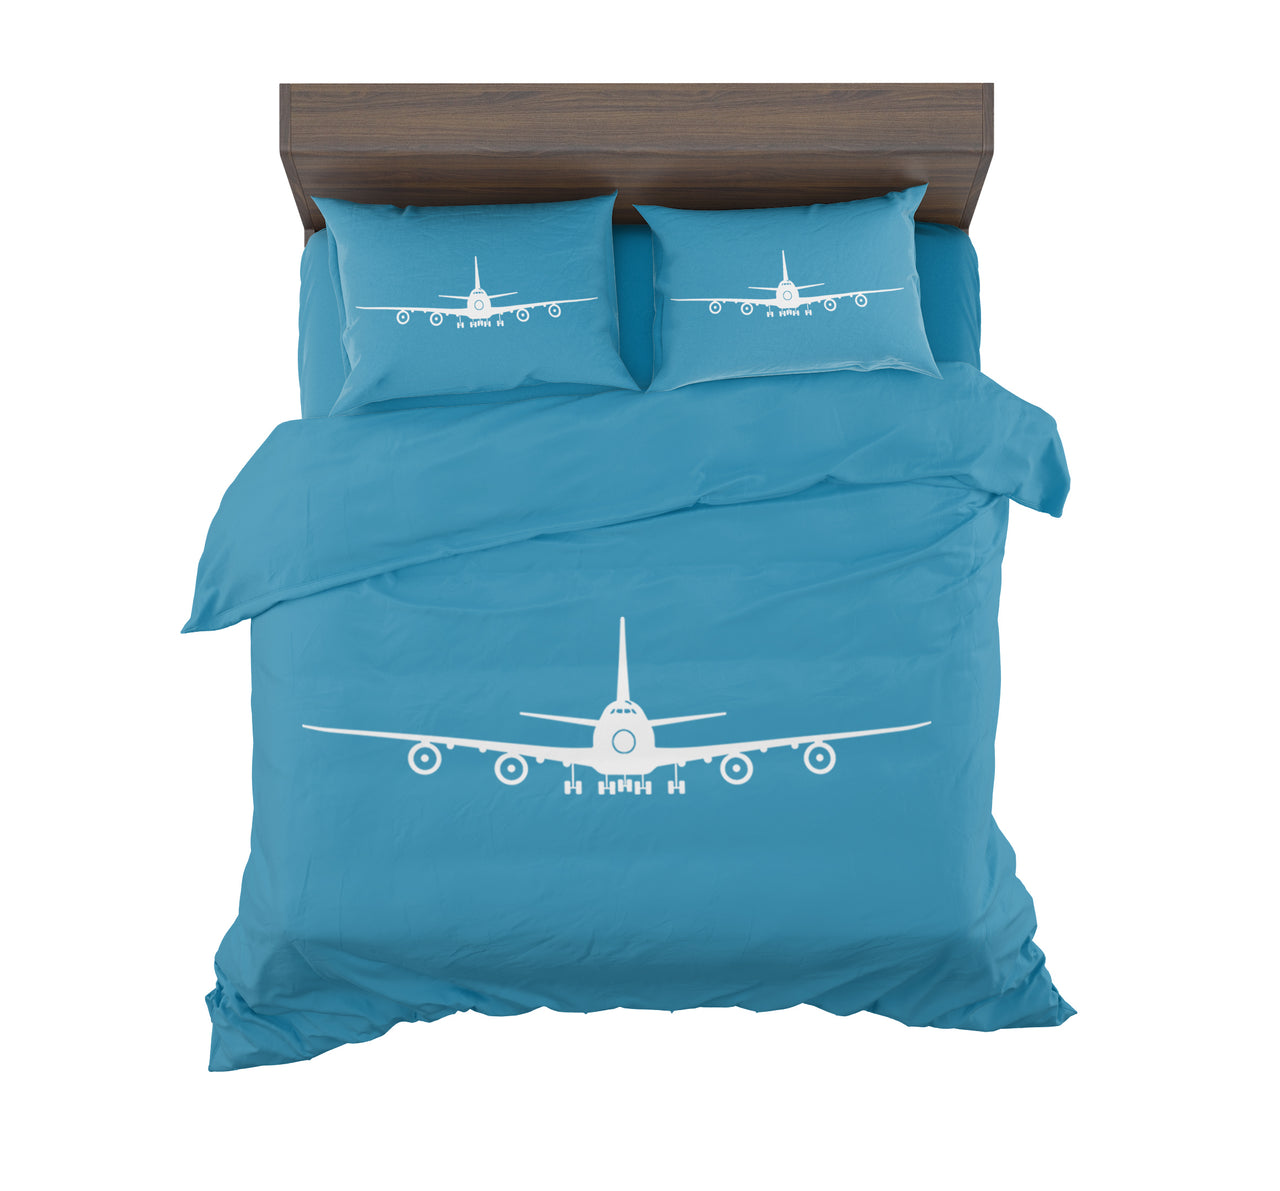 Boeing 747 Silhouette Designed Bedding Sets